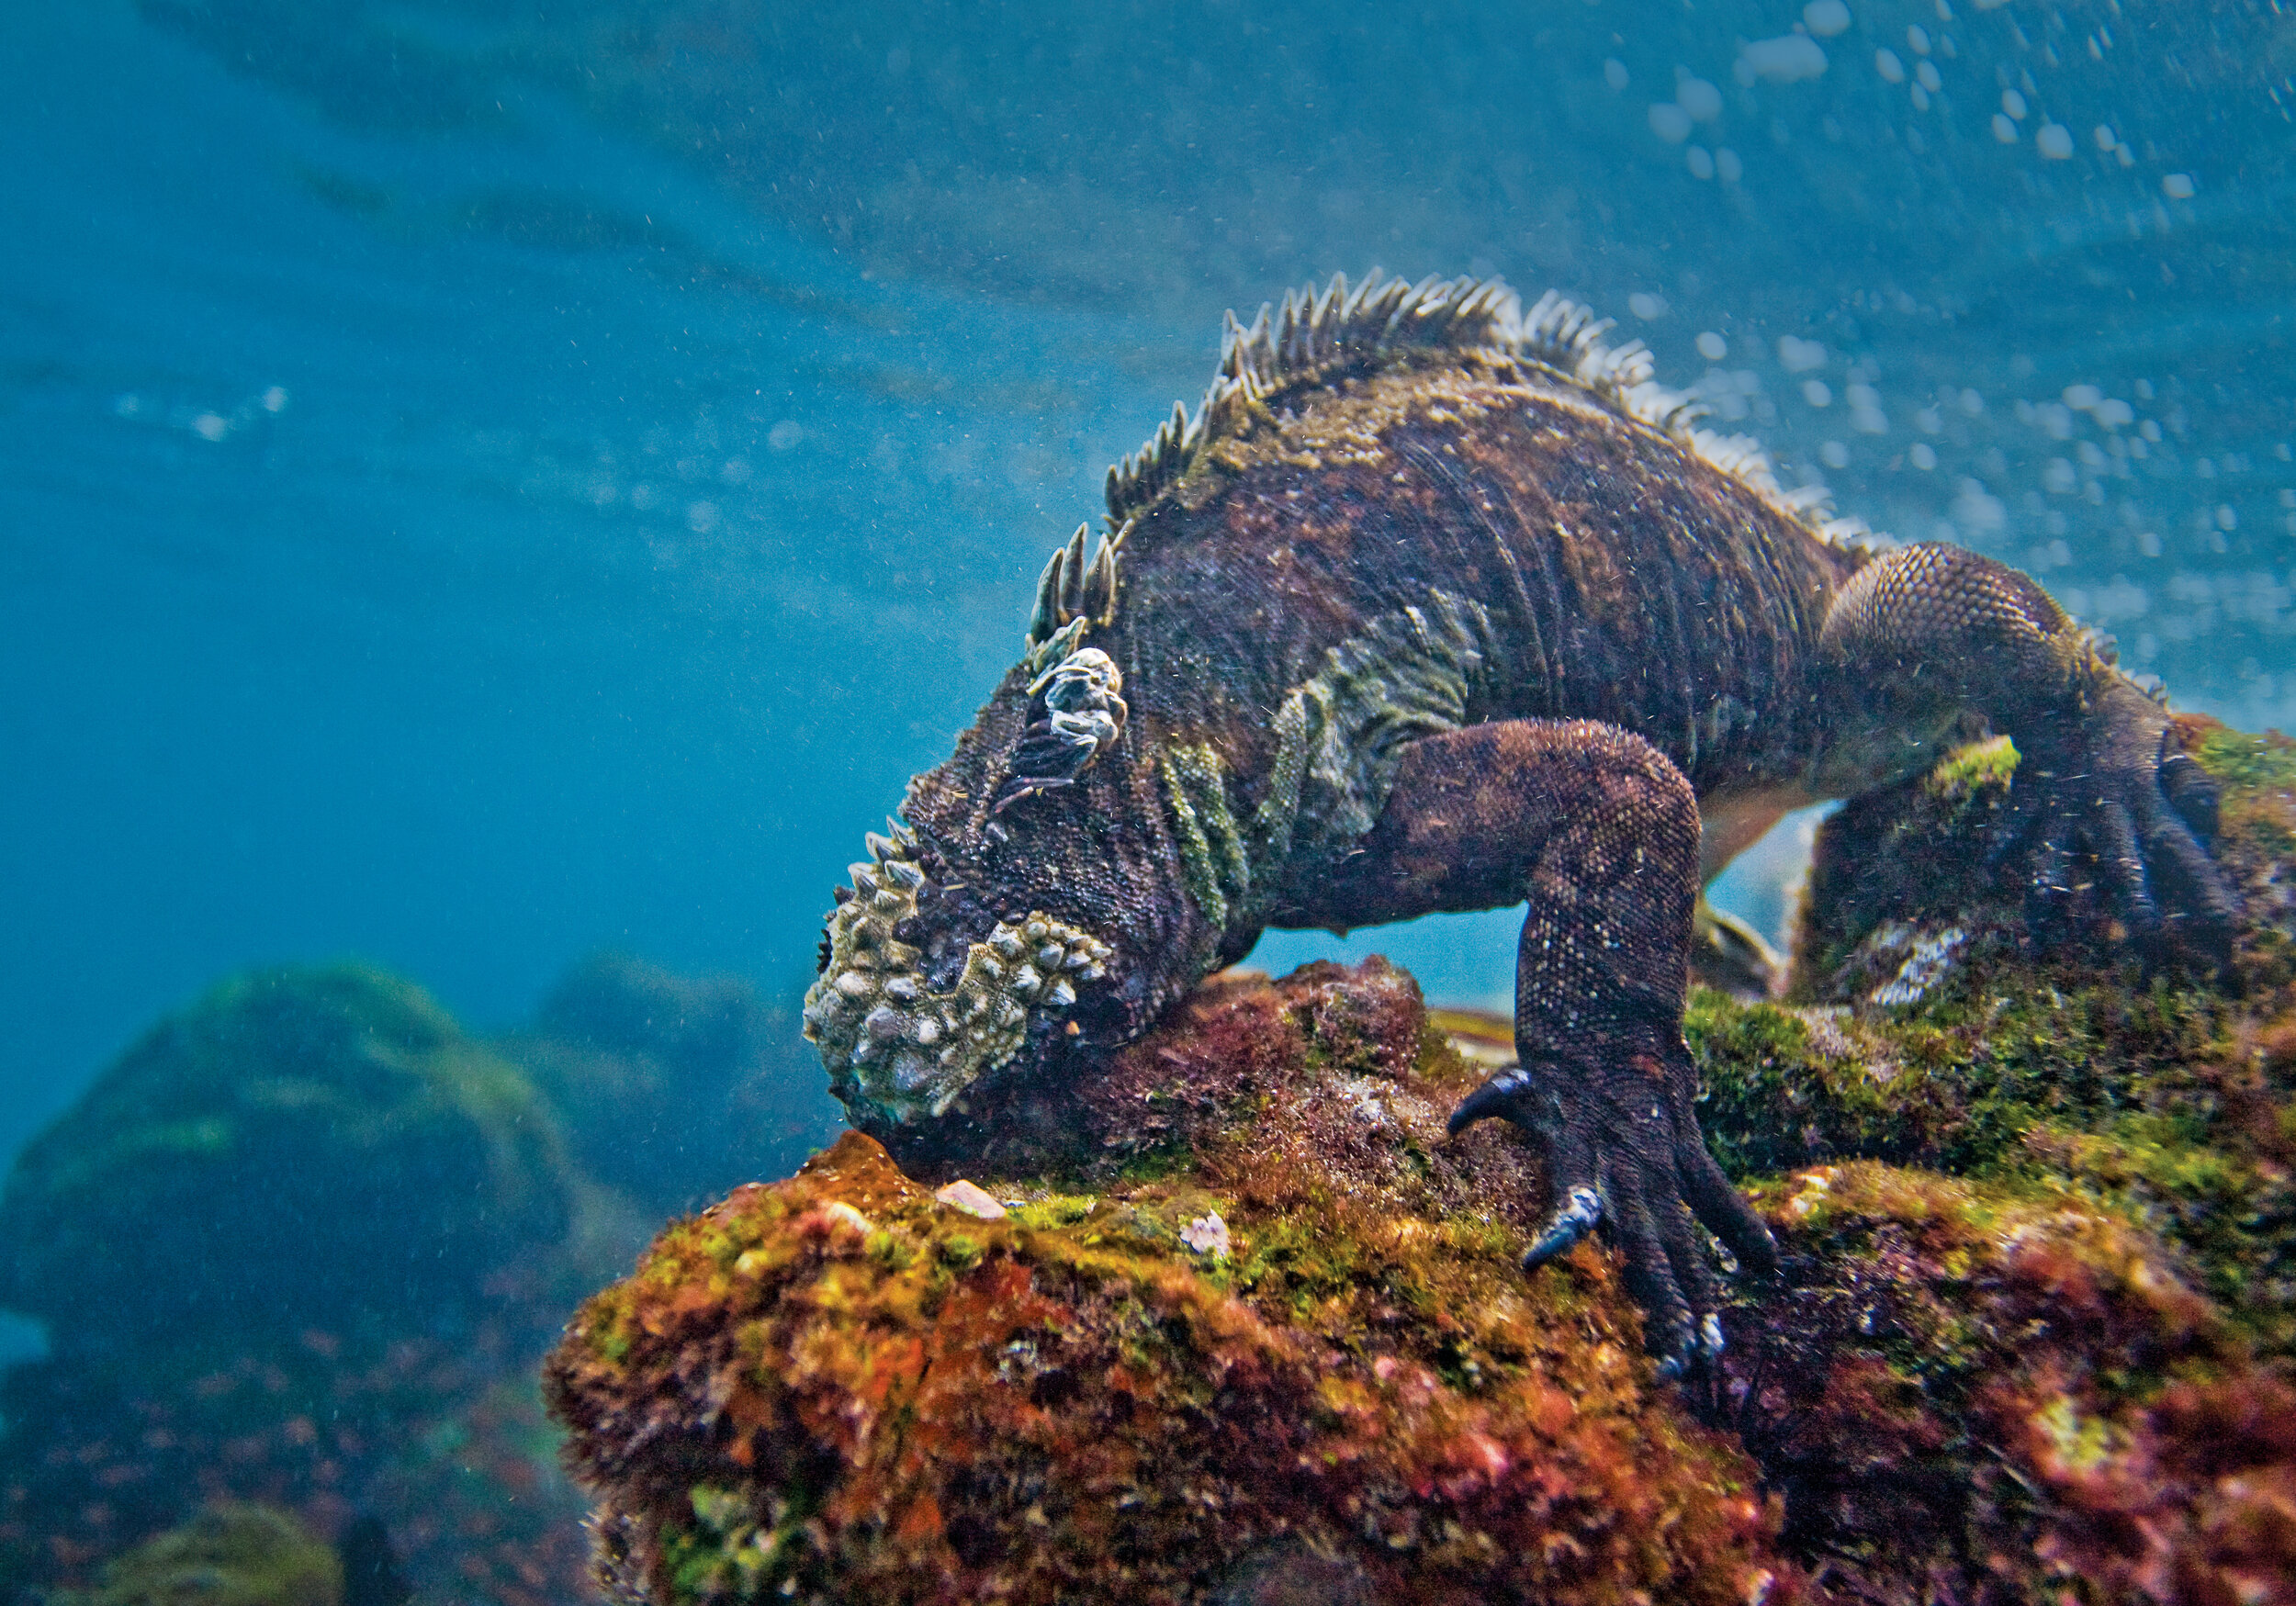   The endemic Galápagos marine iguana, which is the only species of iguana worldwide that feasts underwater on algae (photo credit: Lindblad Expeditions)  